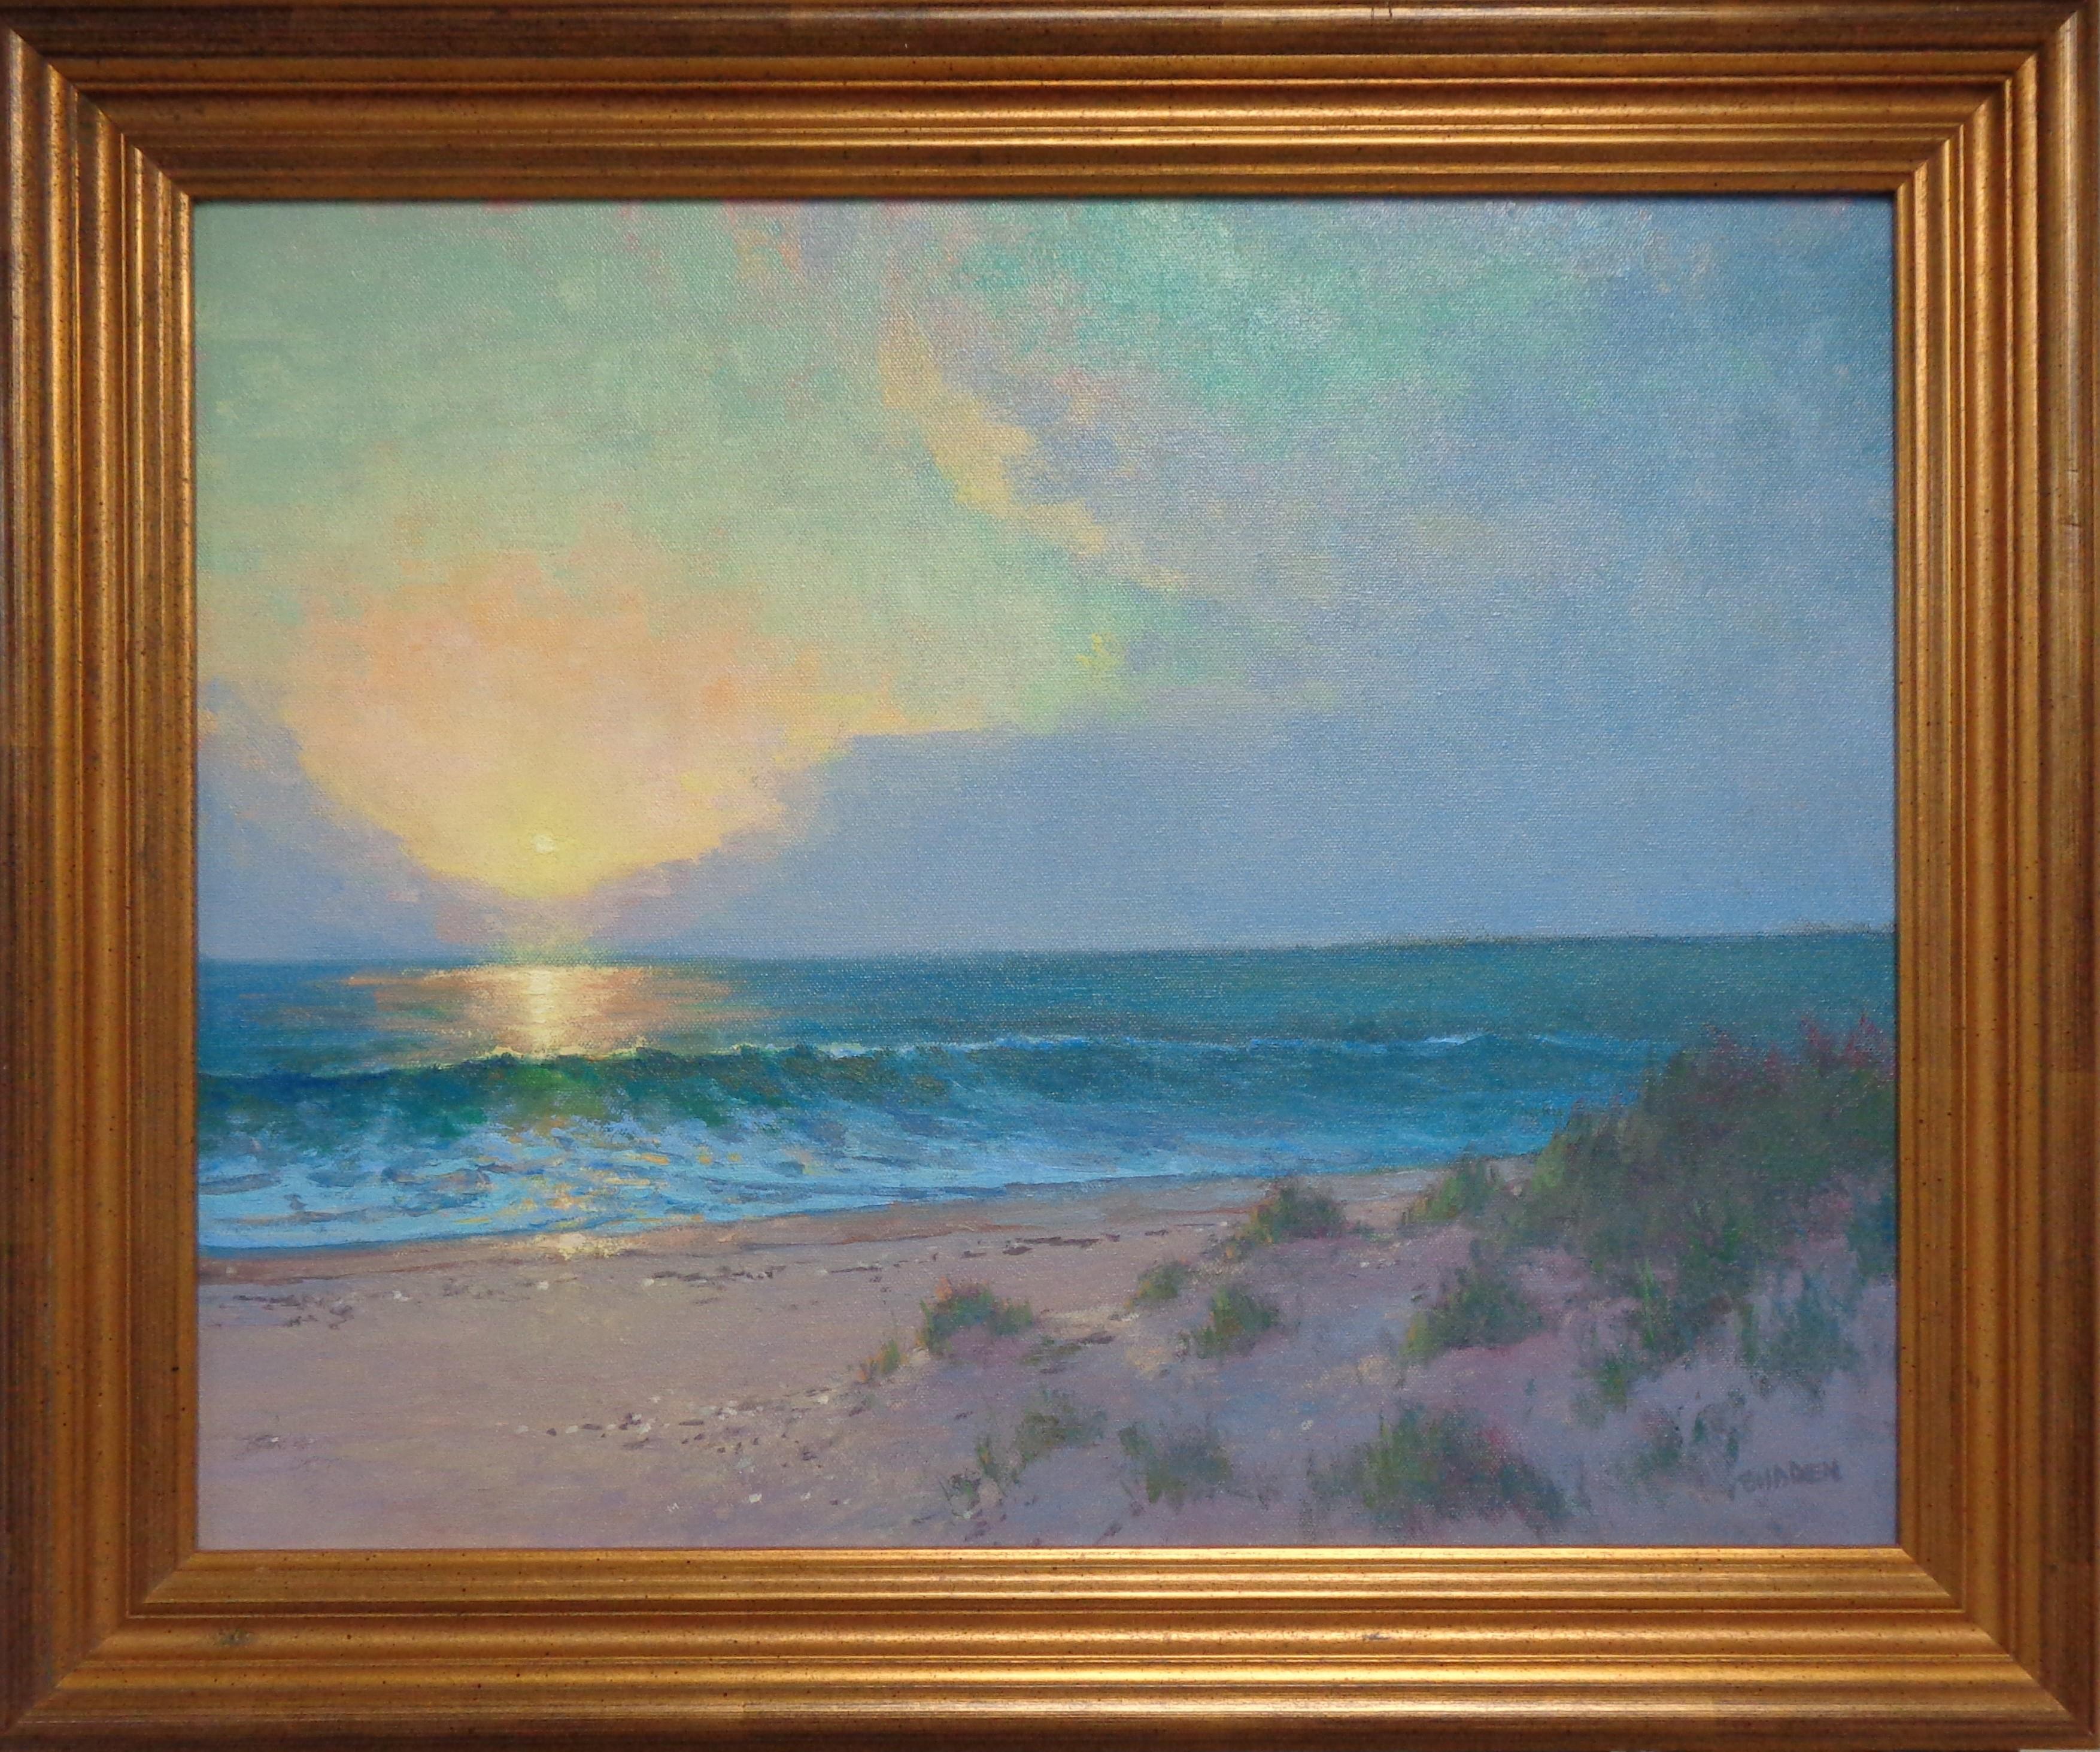 Maigical Moment
oil/canvas 16 x 20 image unframed
20.38 x 24.38 framed
Magical Moment is an oil painting on stretched canvas by award winning contemporary artist Michael Budden that showcases a beautiful sunrise view of the ocean. Painting is in